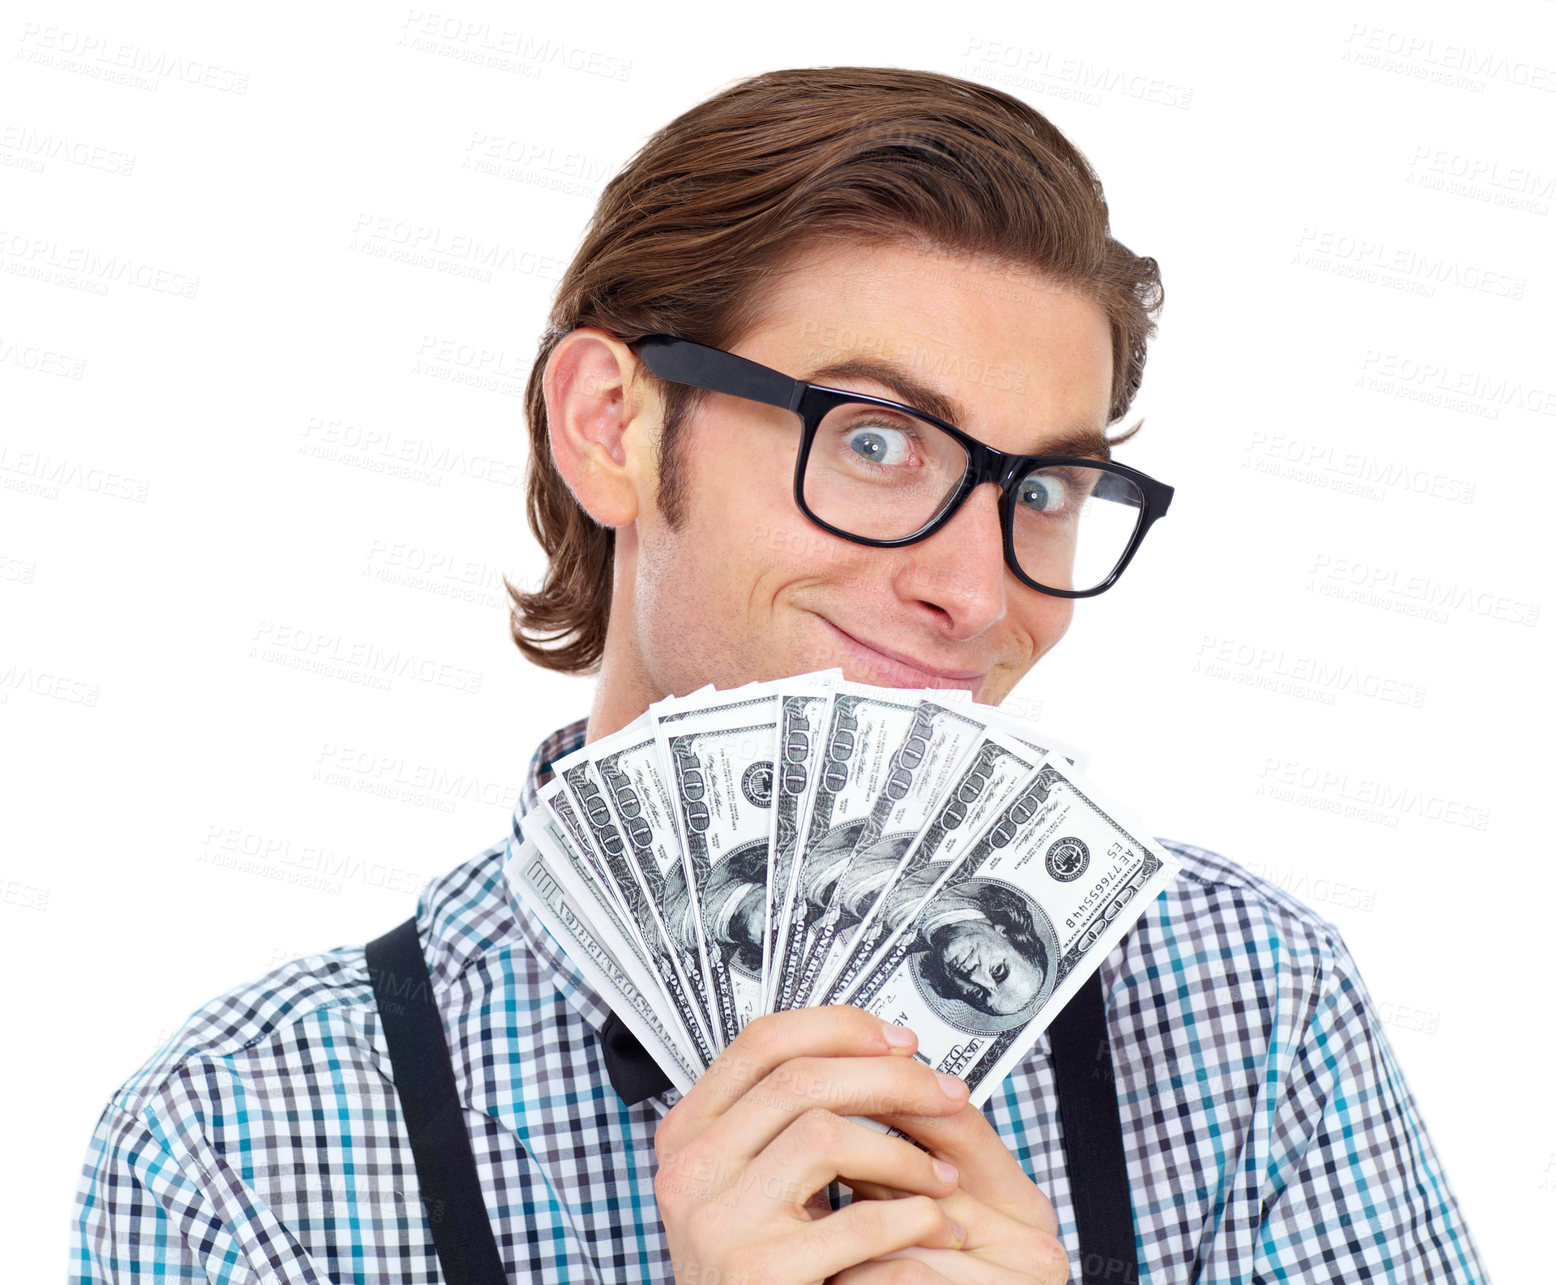 Buy stock photo Shot of a young man showing off his money